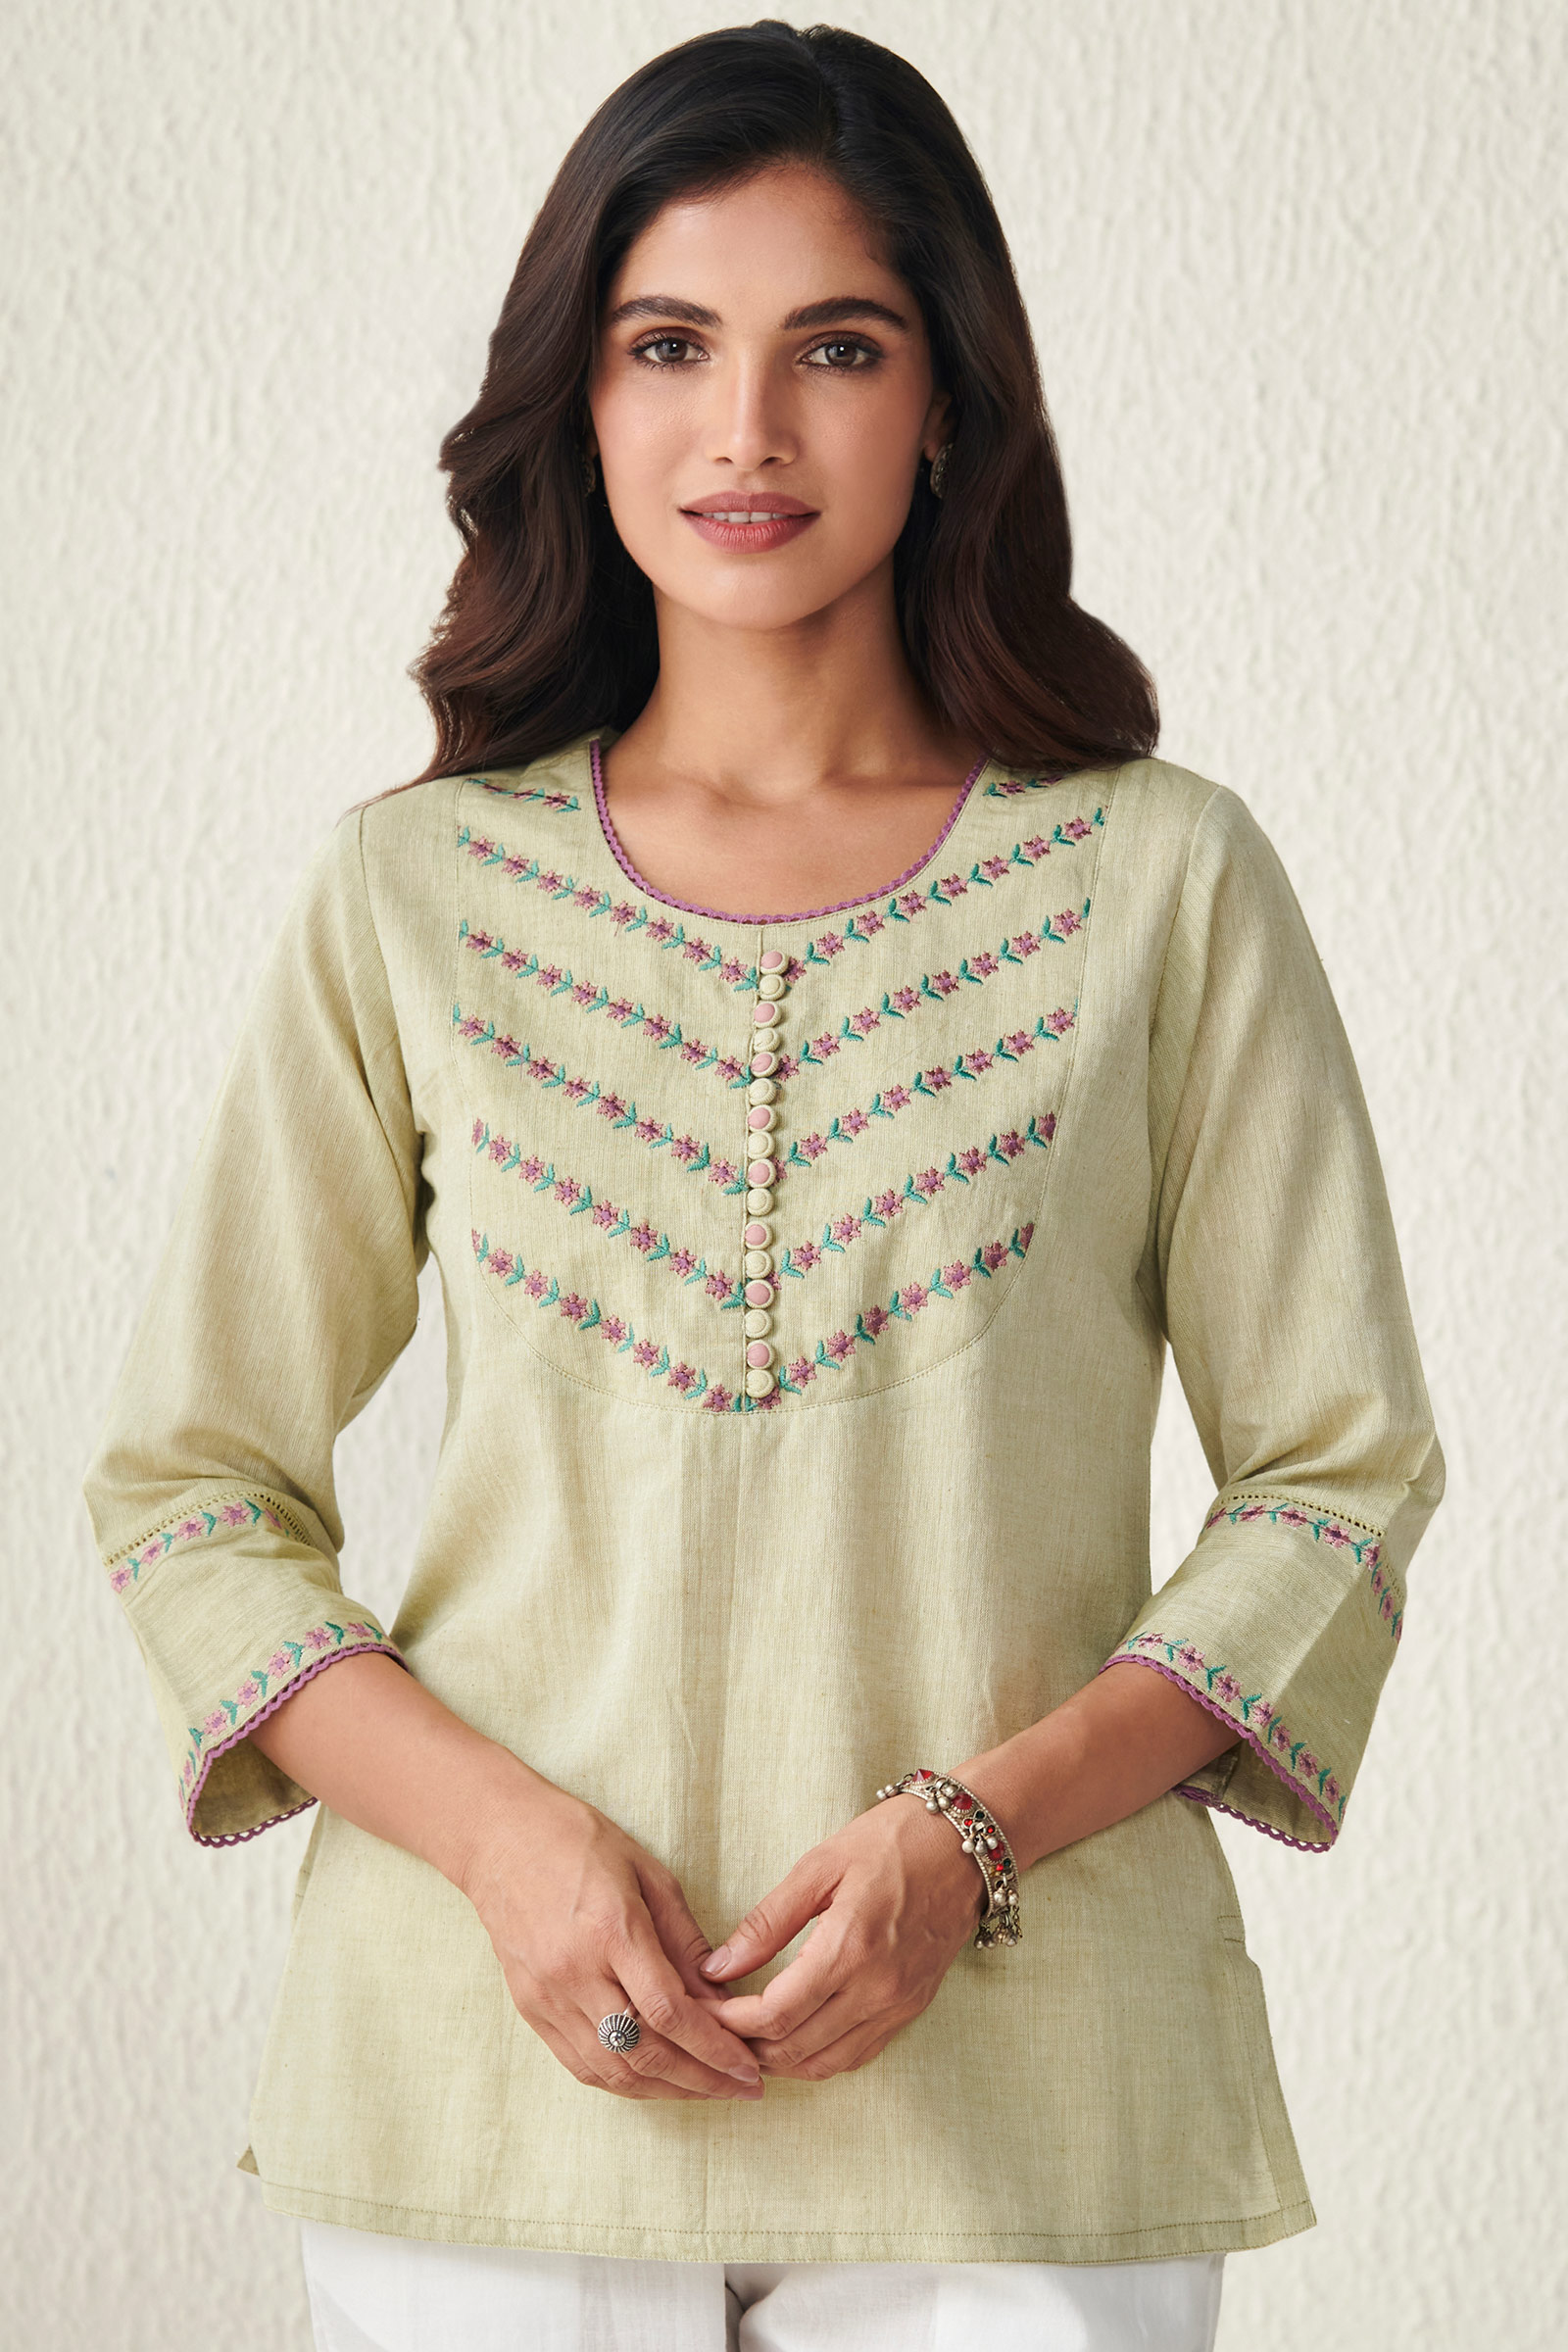 Buy Green Handcrafted Cotton Top for Women | FGT22-19 | Farida Gupta